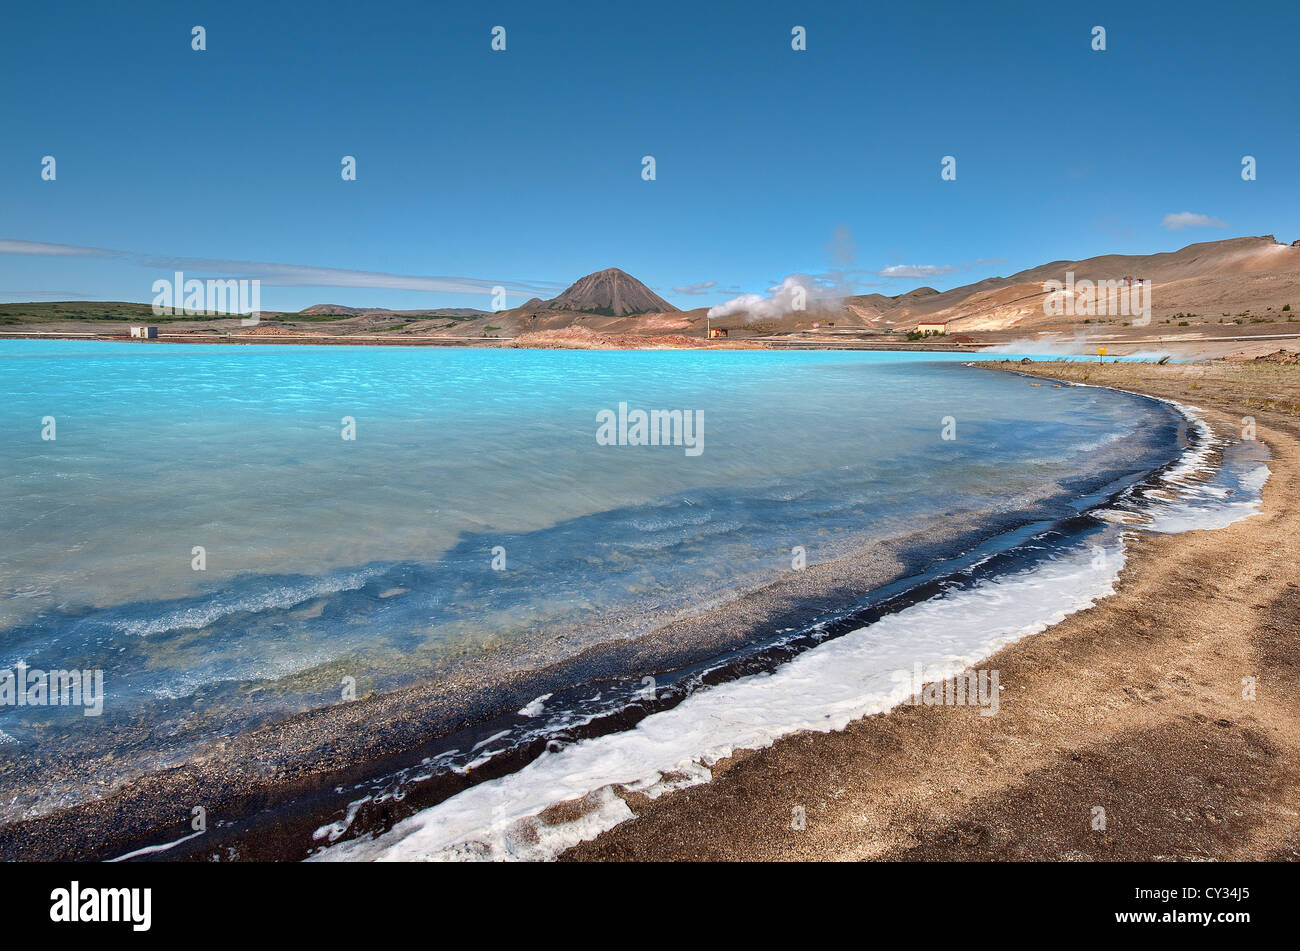 The bright blue hot spring waters around Lake Mývatn are provide geothermal energy for Iceland's national electricity grid. Stock Photo